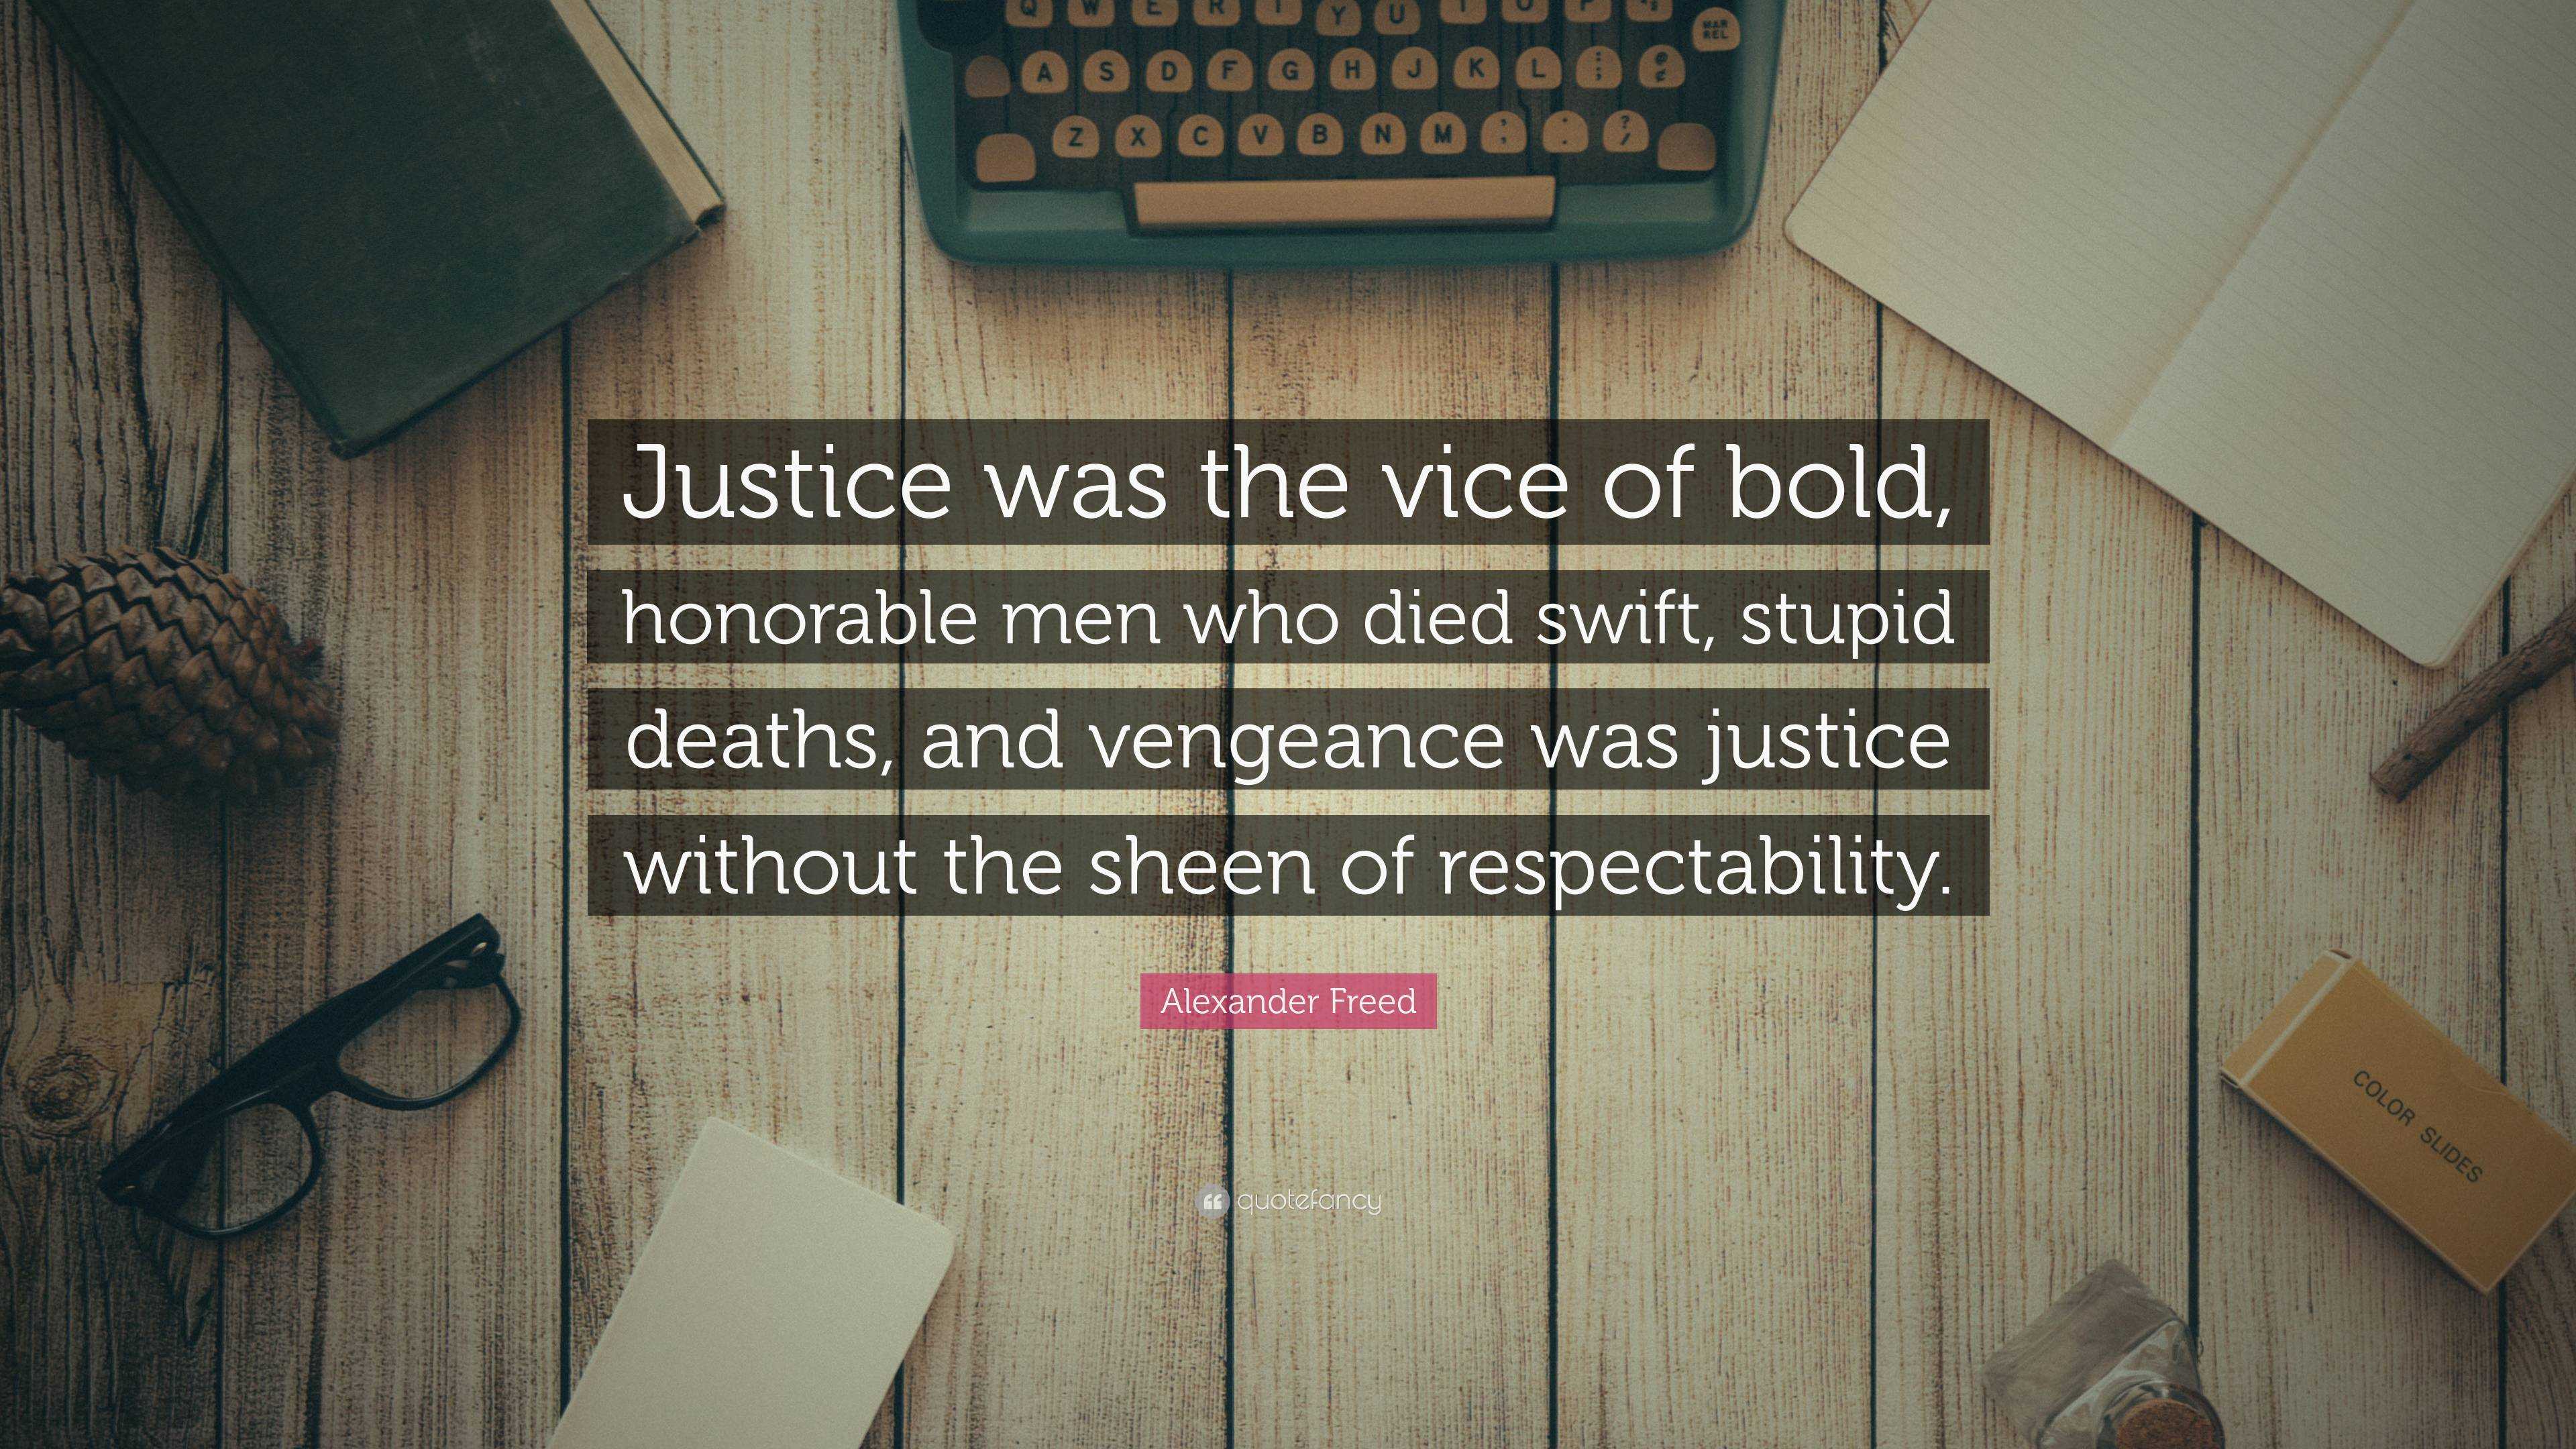 https://quotefancy.com/media/wallpaper/3840x2160/6914382-Alexander-Freed-Quote-Justice-was-the-vice-of-bold-honorable-men.jpg